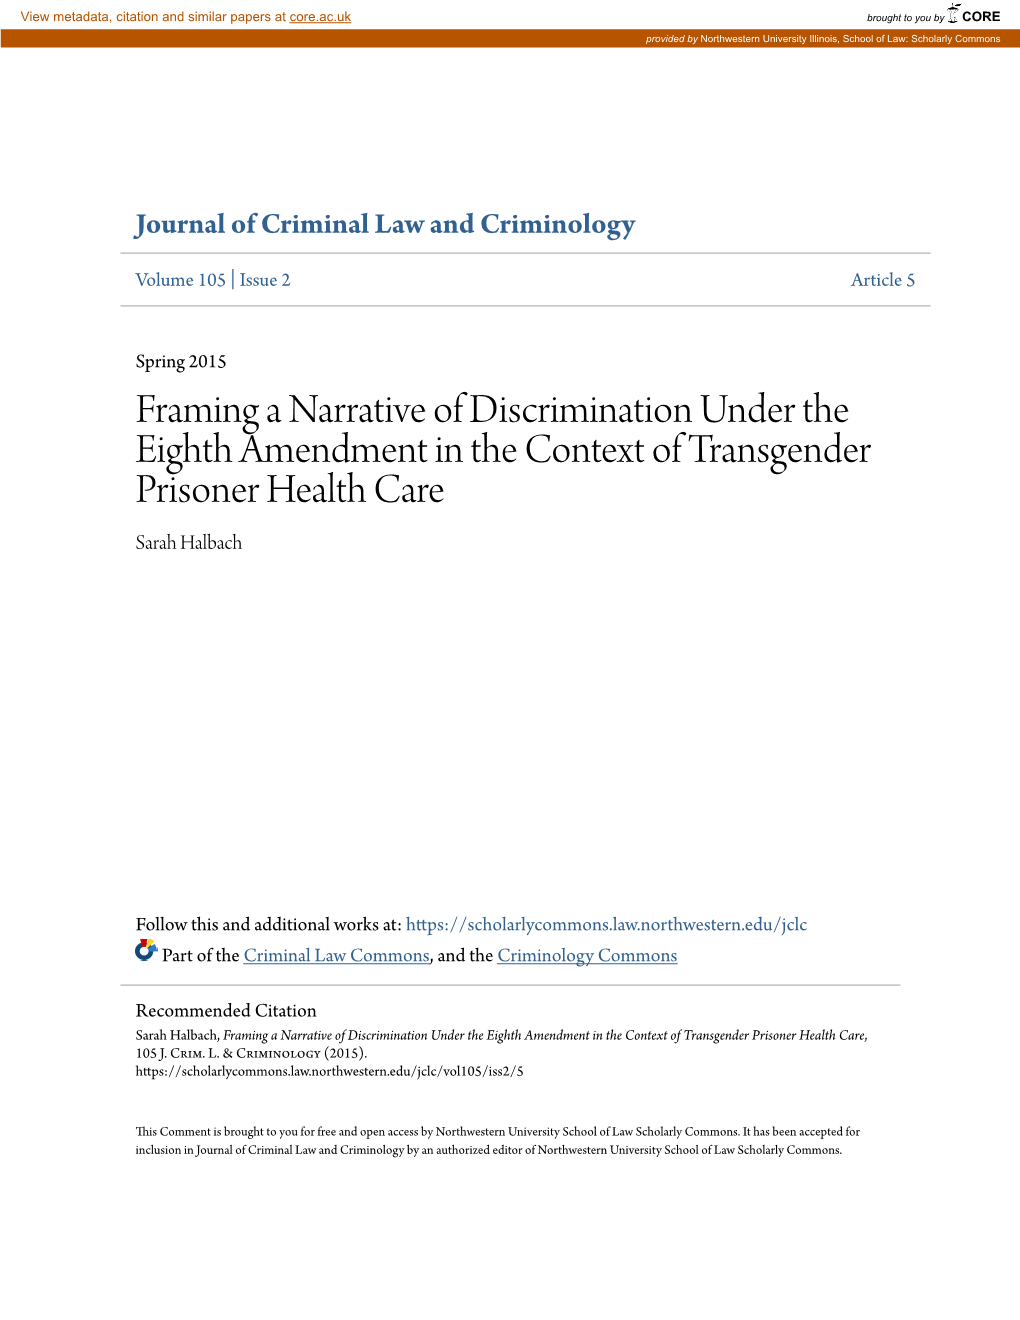 Framing a Narrative of Discrimination Under the Eighth Amendment in the Context of Transgender Prisoner Health Care Sarah Halbach